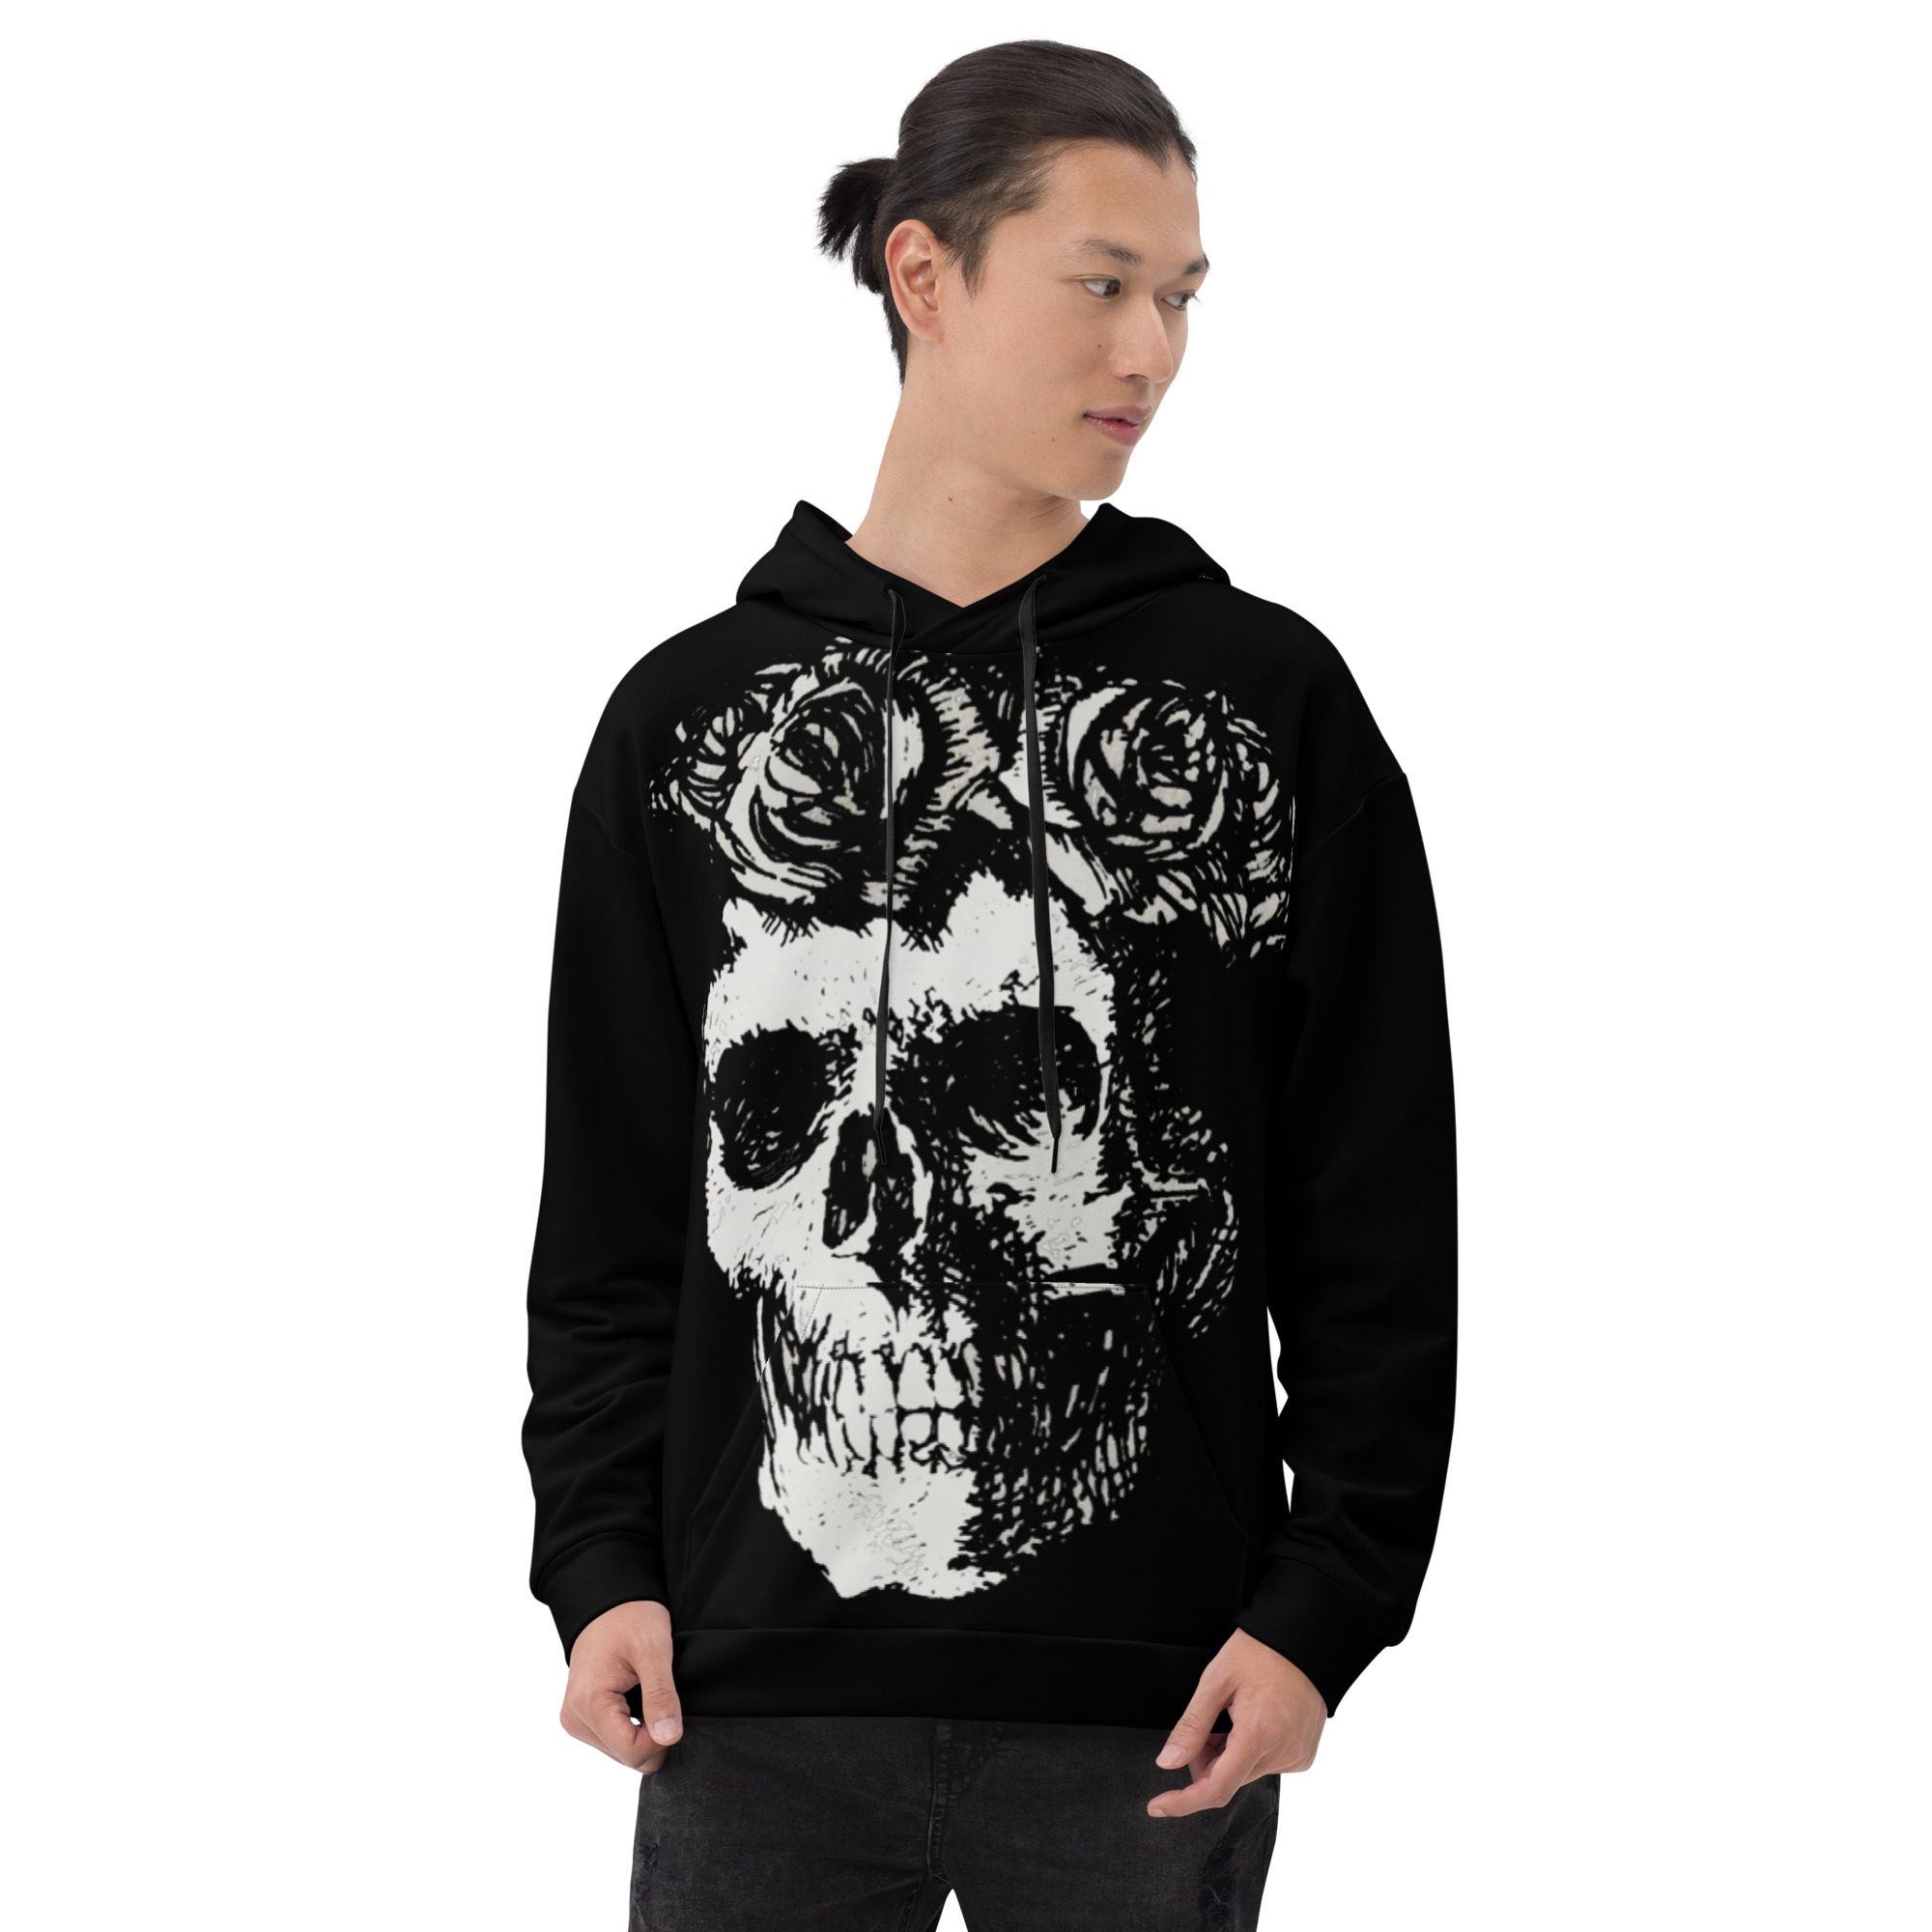 all-over-print-unisex-hoodie-white-front-63cac69cc73c0.jpg